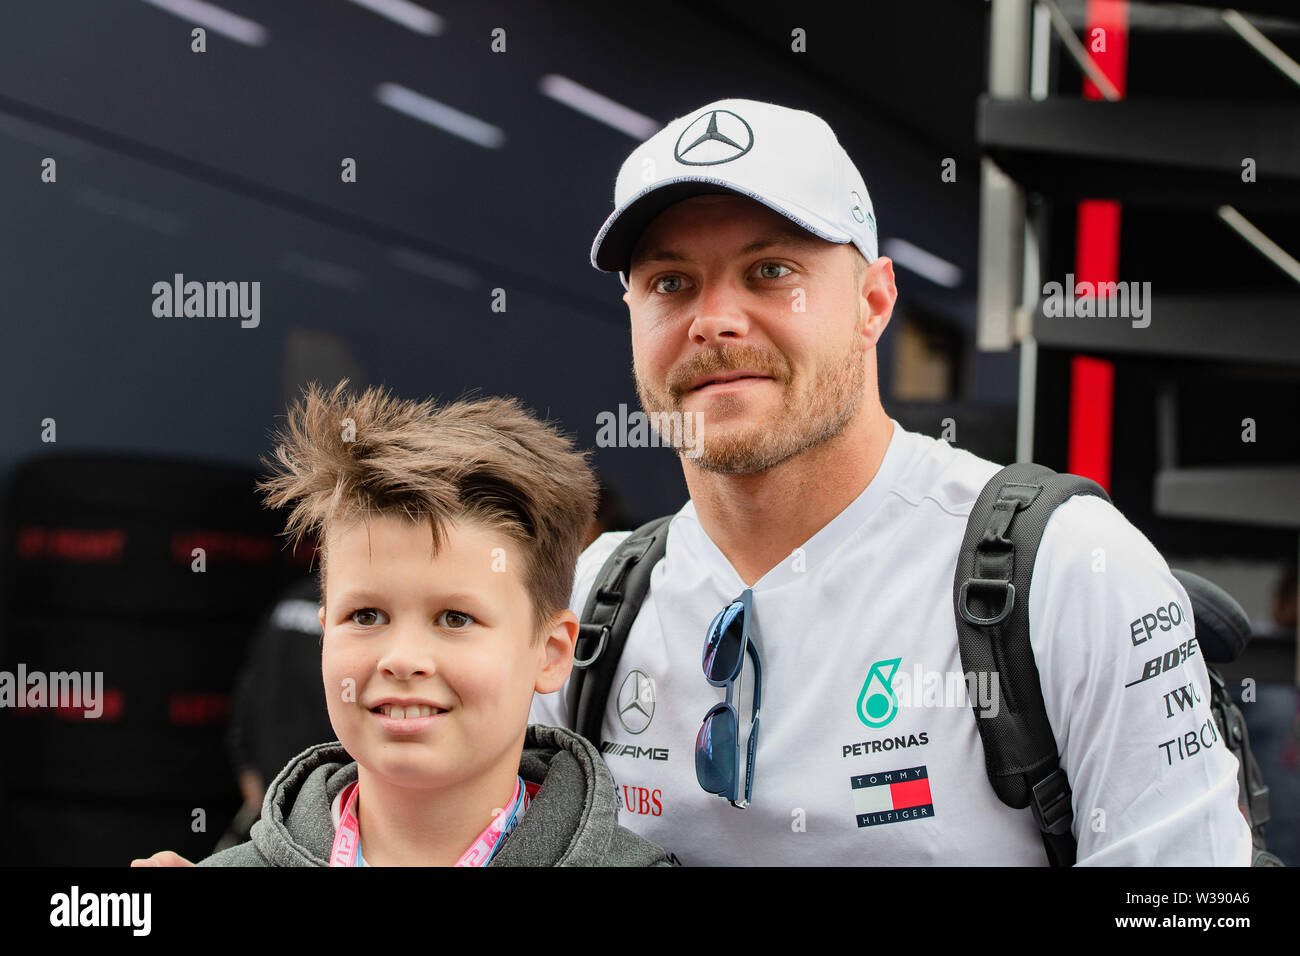 Towcester, UK. 13th Jul, 2019. Valtteri Bottas of Mercedes with his fan in  practice session 3 during Formula 1 Rolex British Grand Prix 2019 at  Silverstone Circuit on Saturday, July 13, 2019